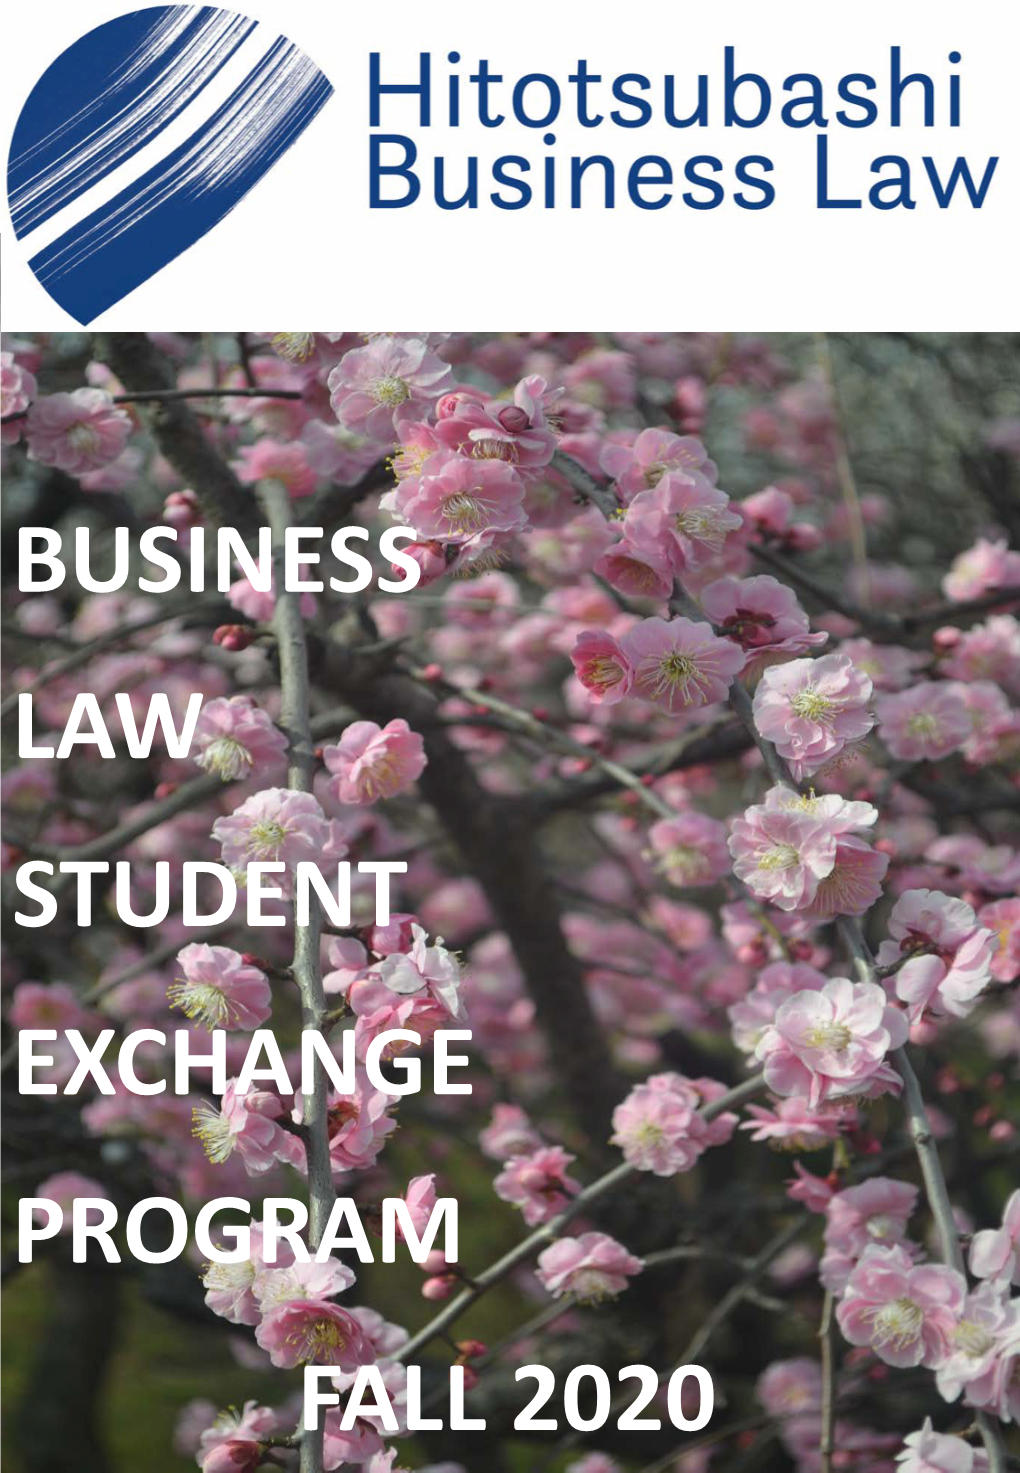 BUSINESS LAW STUDENT EXCHANGE PROGRAM FALL 2020 Contents